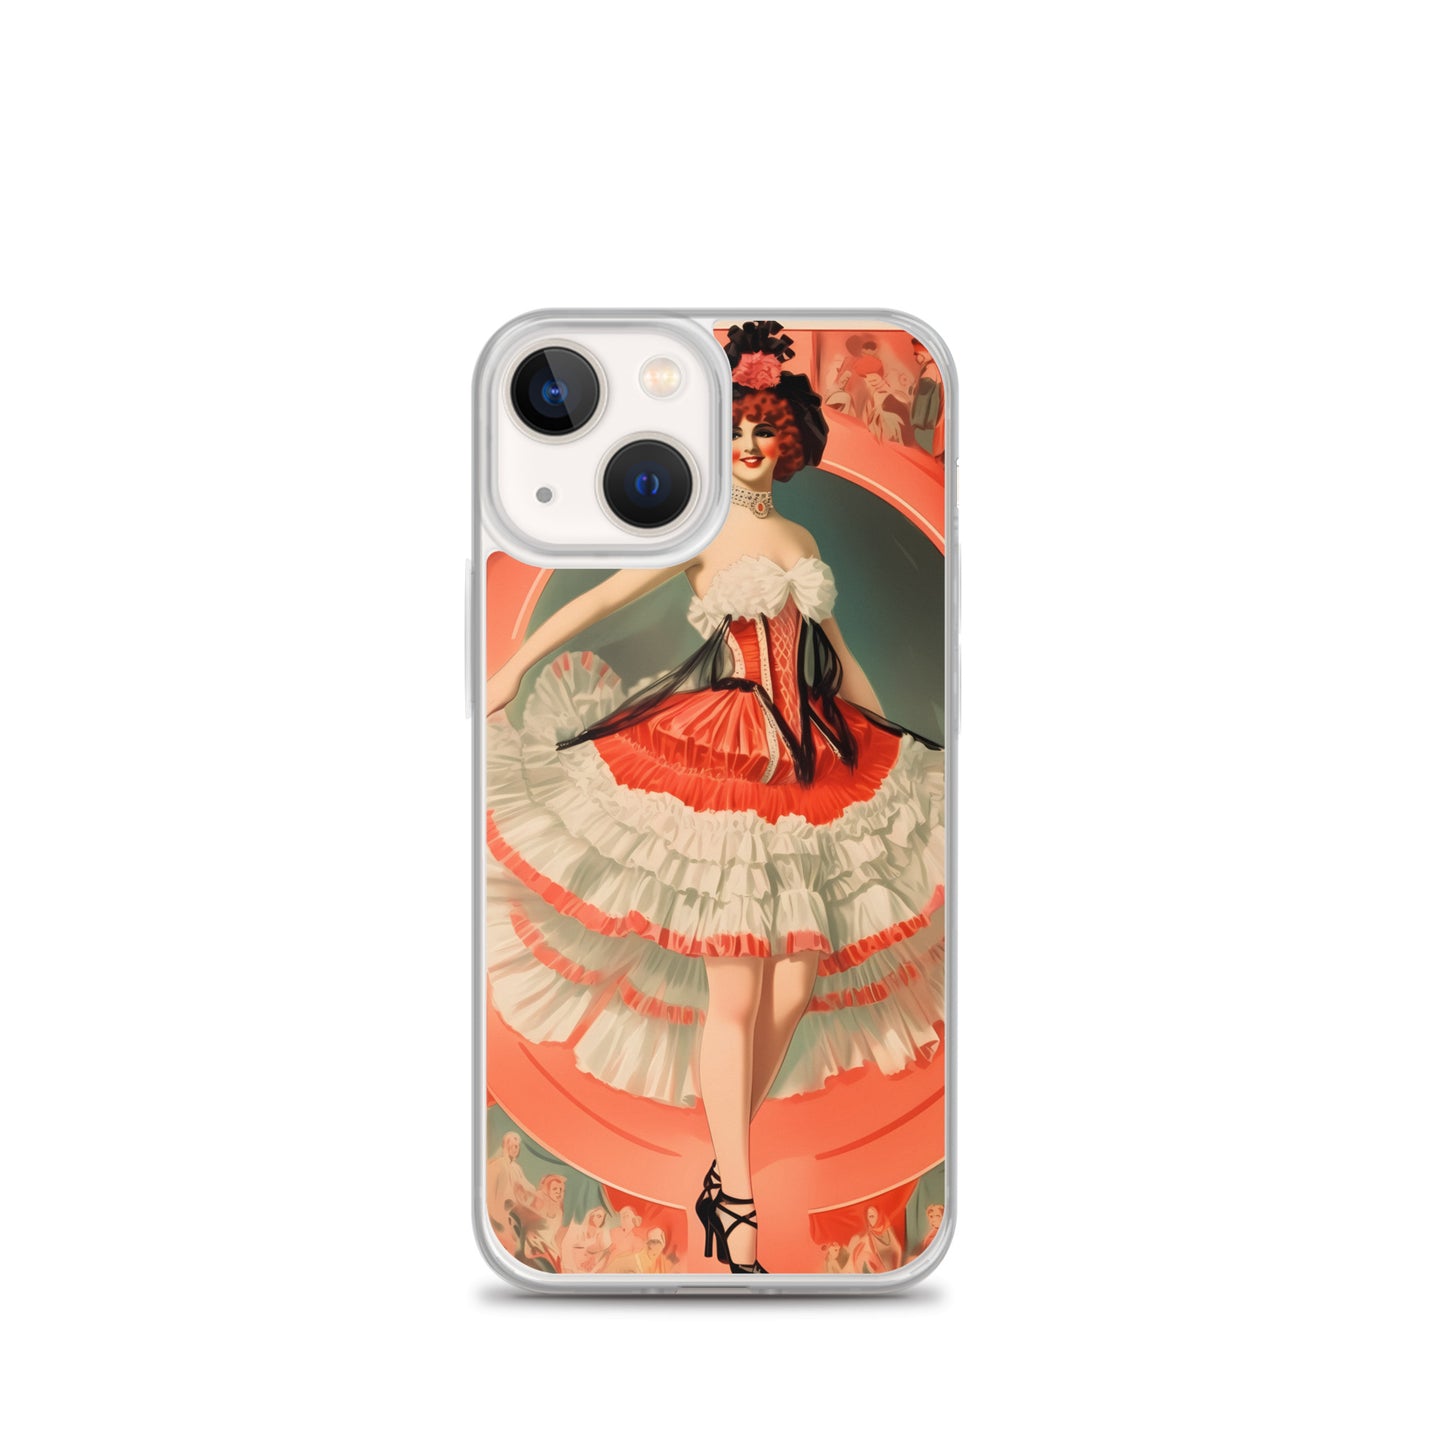 iPhone Case - Vintage Adverts - Can Can Dancer